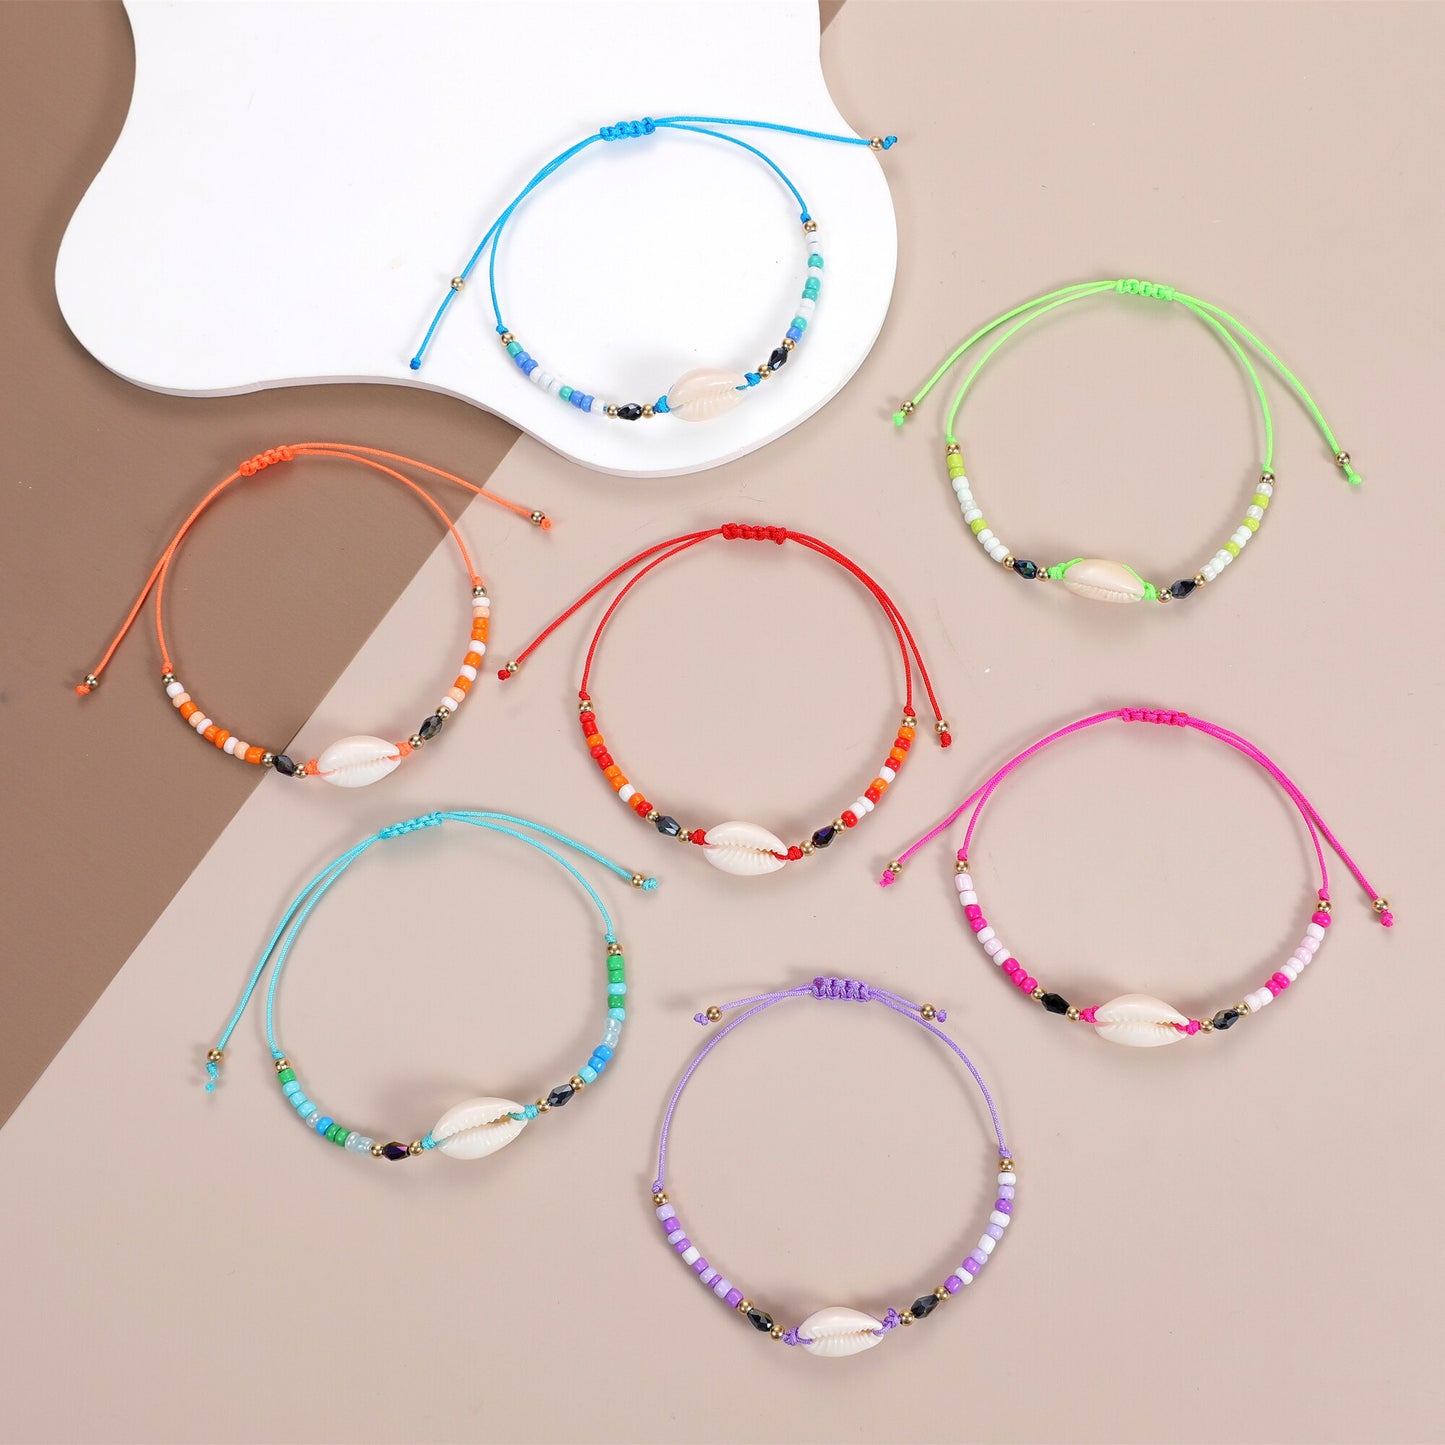 12pcs/Set Crystal Beads Shell Charms Bracelets Adjustable Handmade Woven Rope Chain Bracelet for Women Ethnic Cuff Jewelry